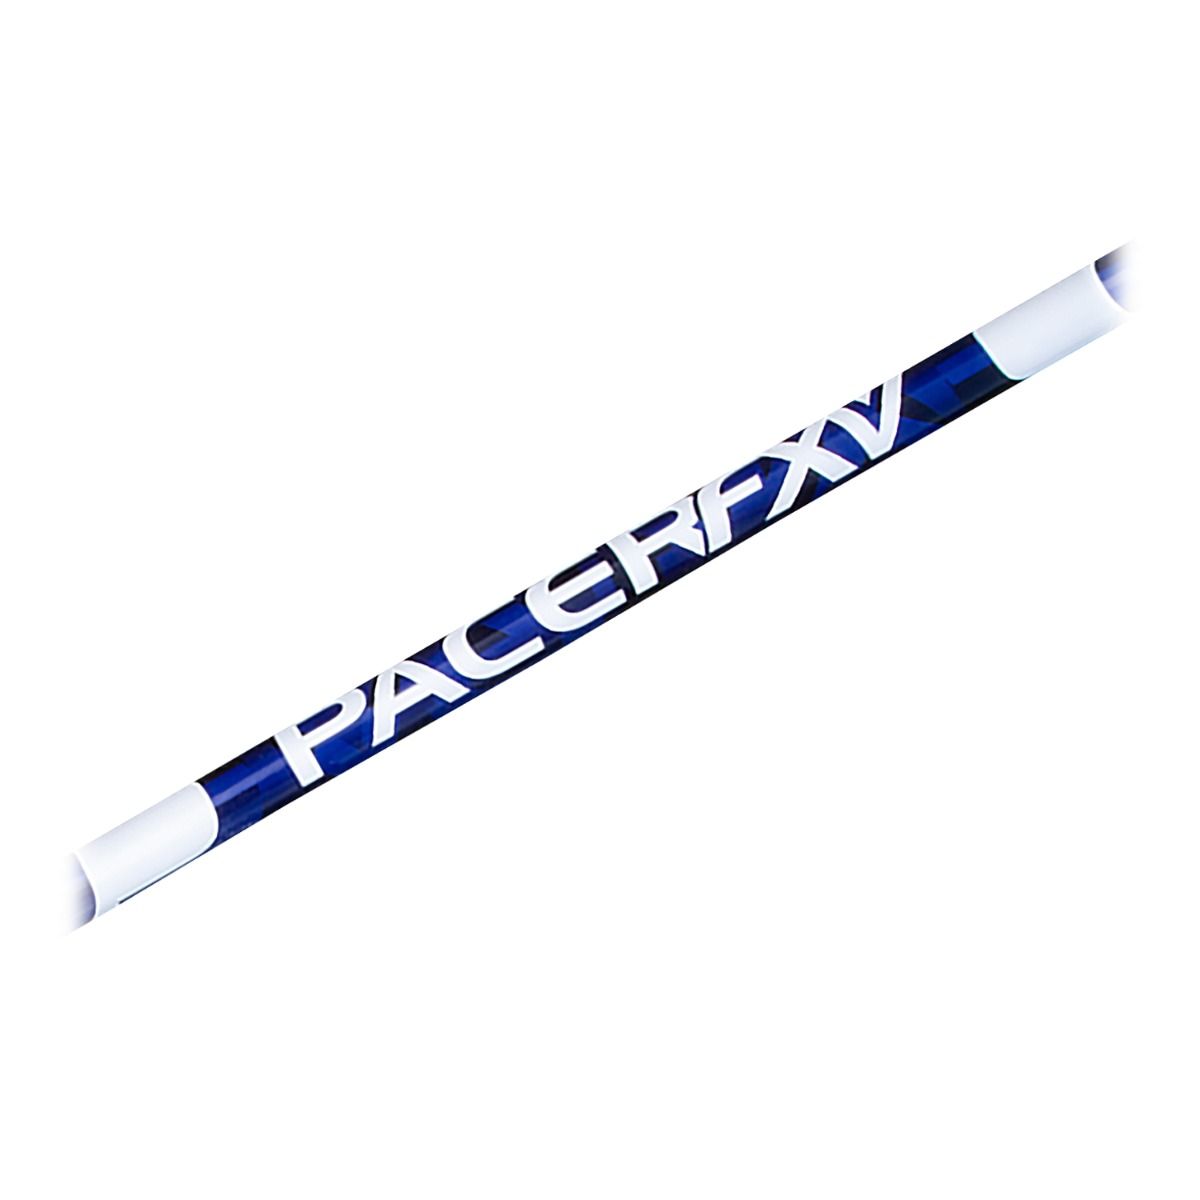 Gill PacerFXV 14' 6" Vaulting Pole